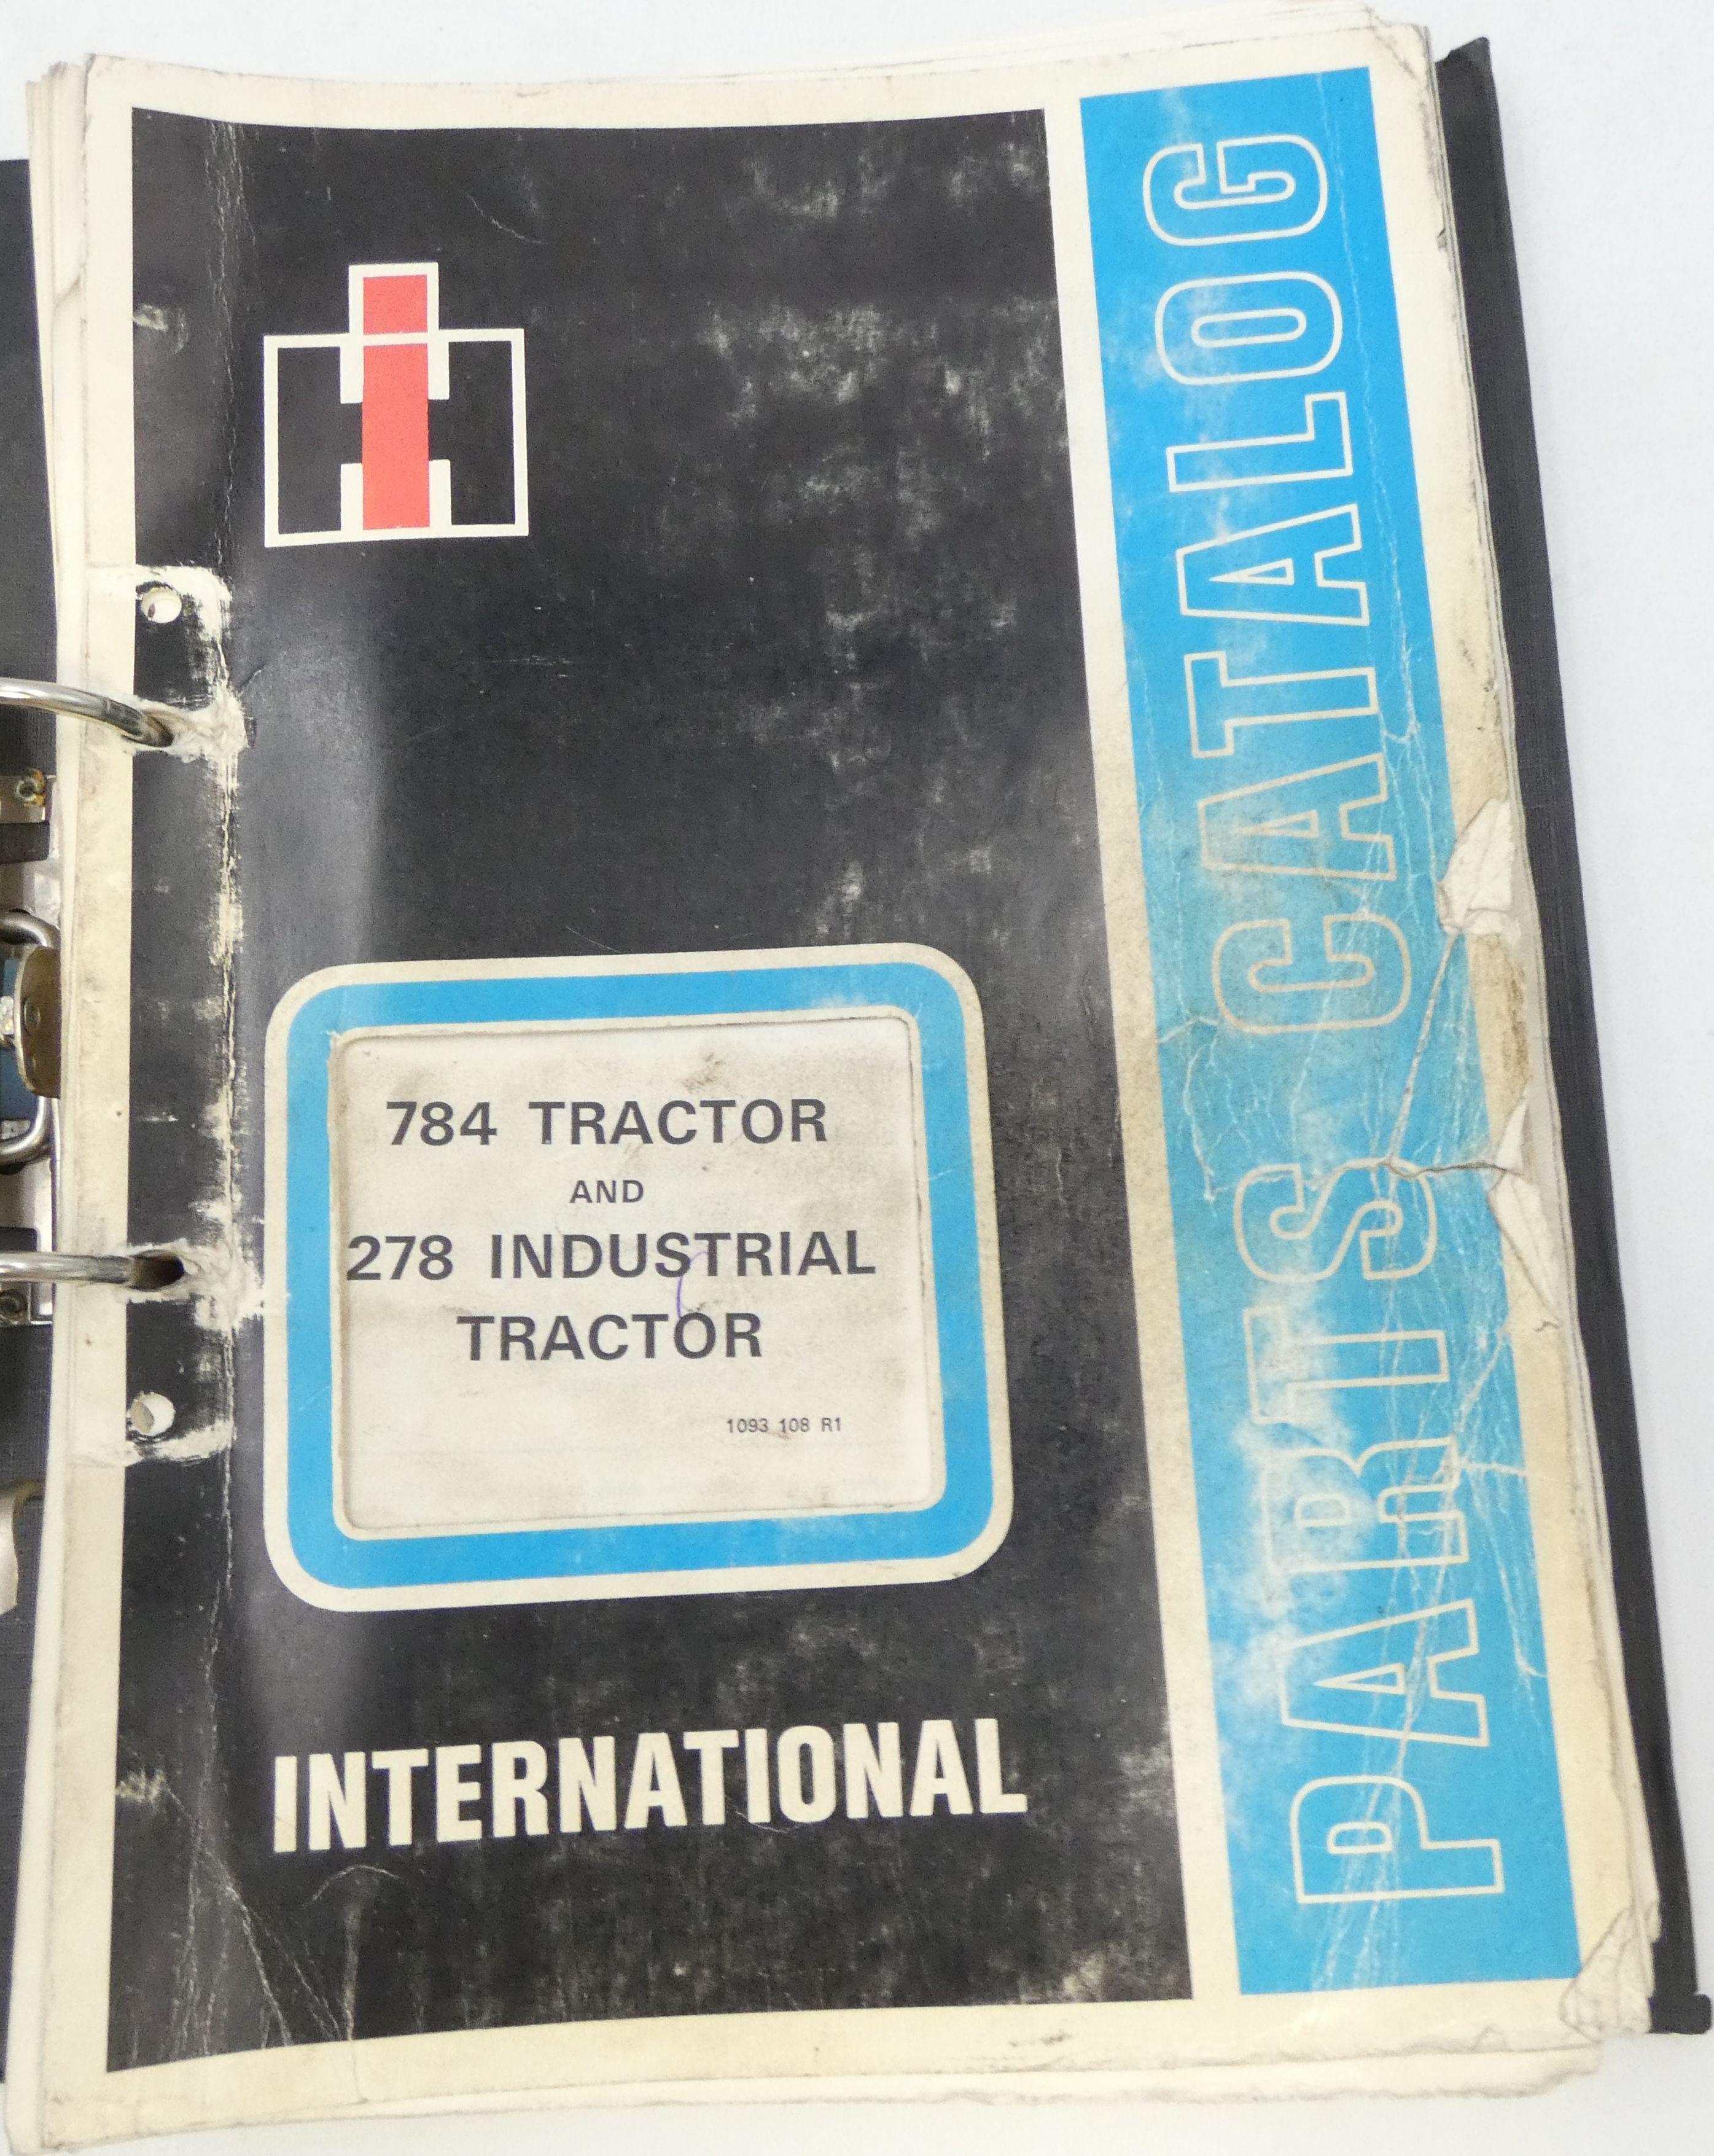 International 784 tractor and 278 industrial tractor parts catalog